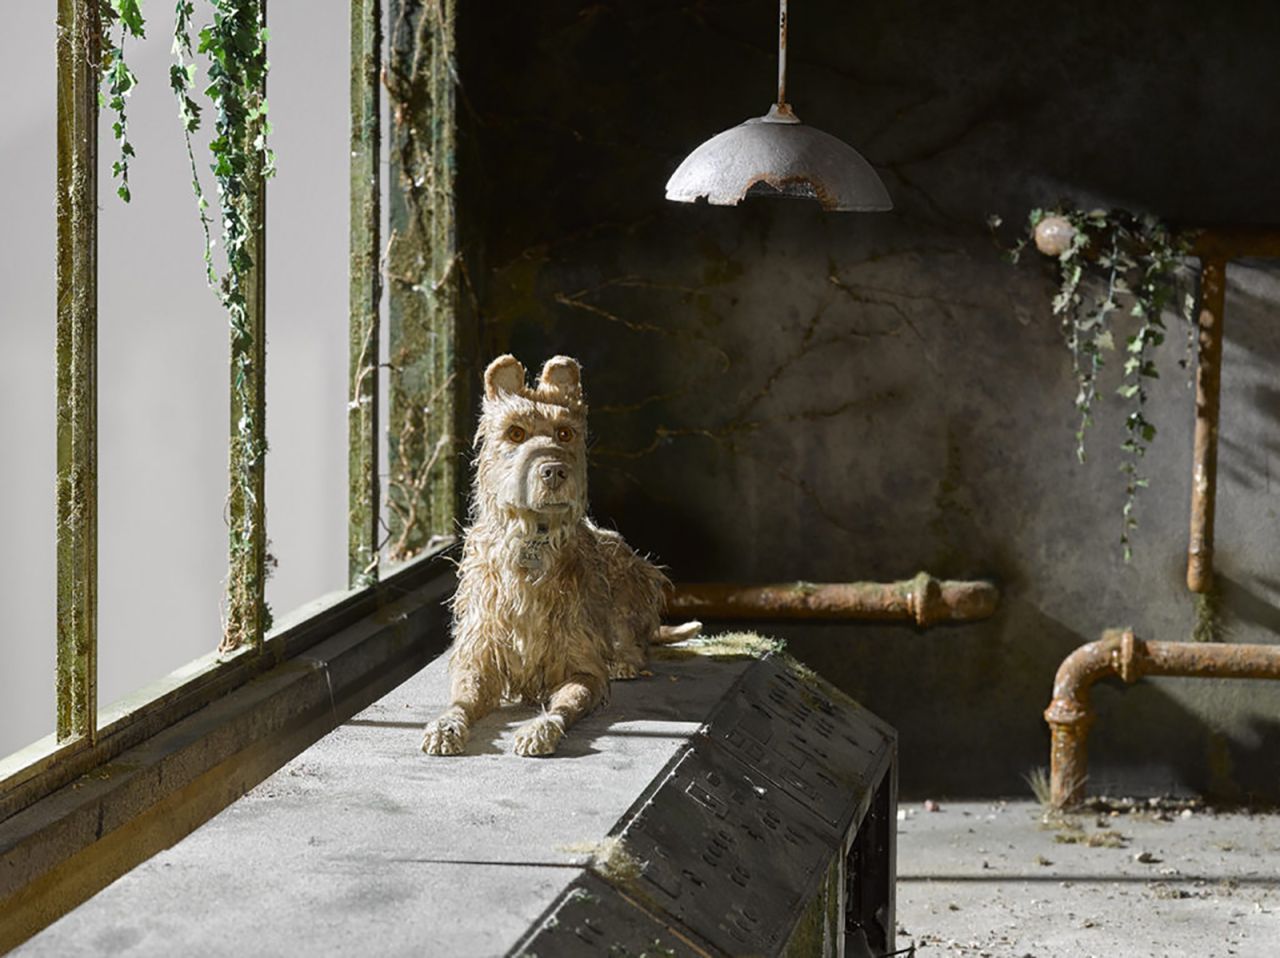 Filming the Isle of Dogs was a huge operation: "We had between 40 and 50 film units running at one time," the cinematographer explains. 